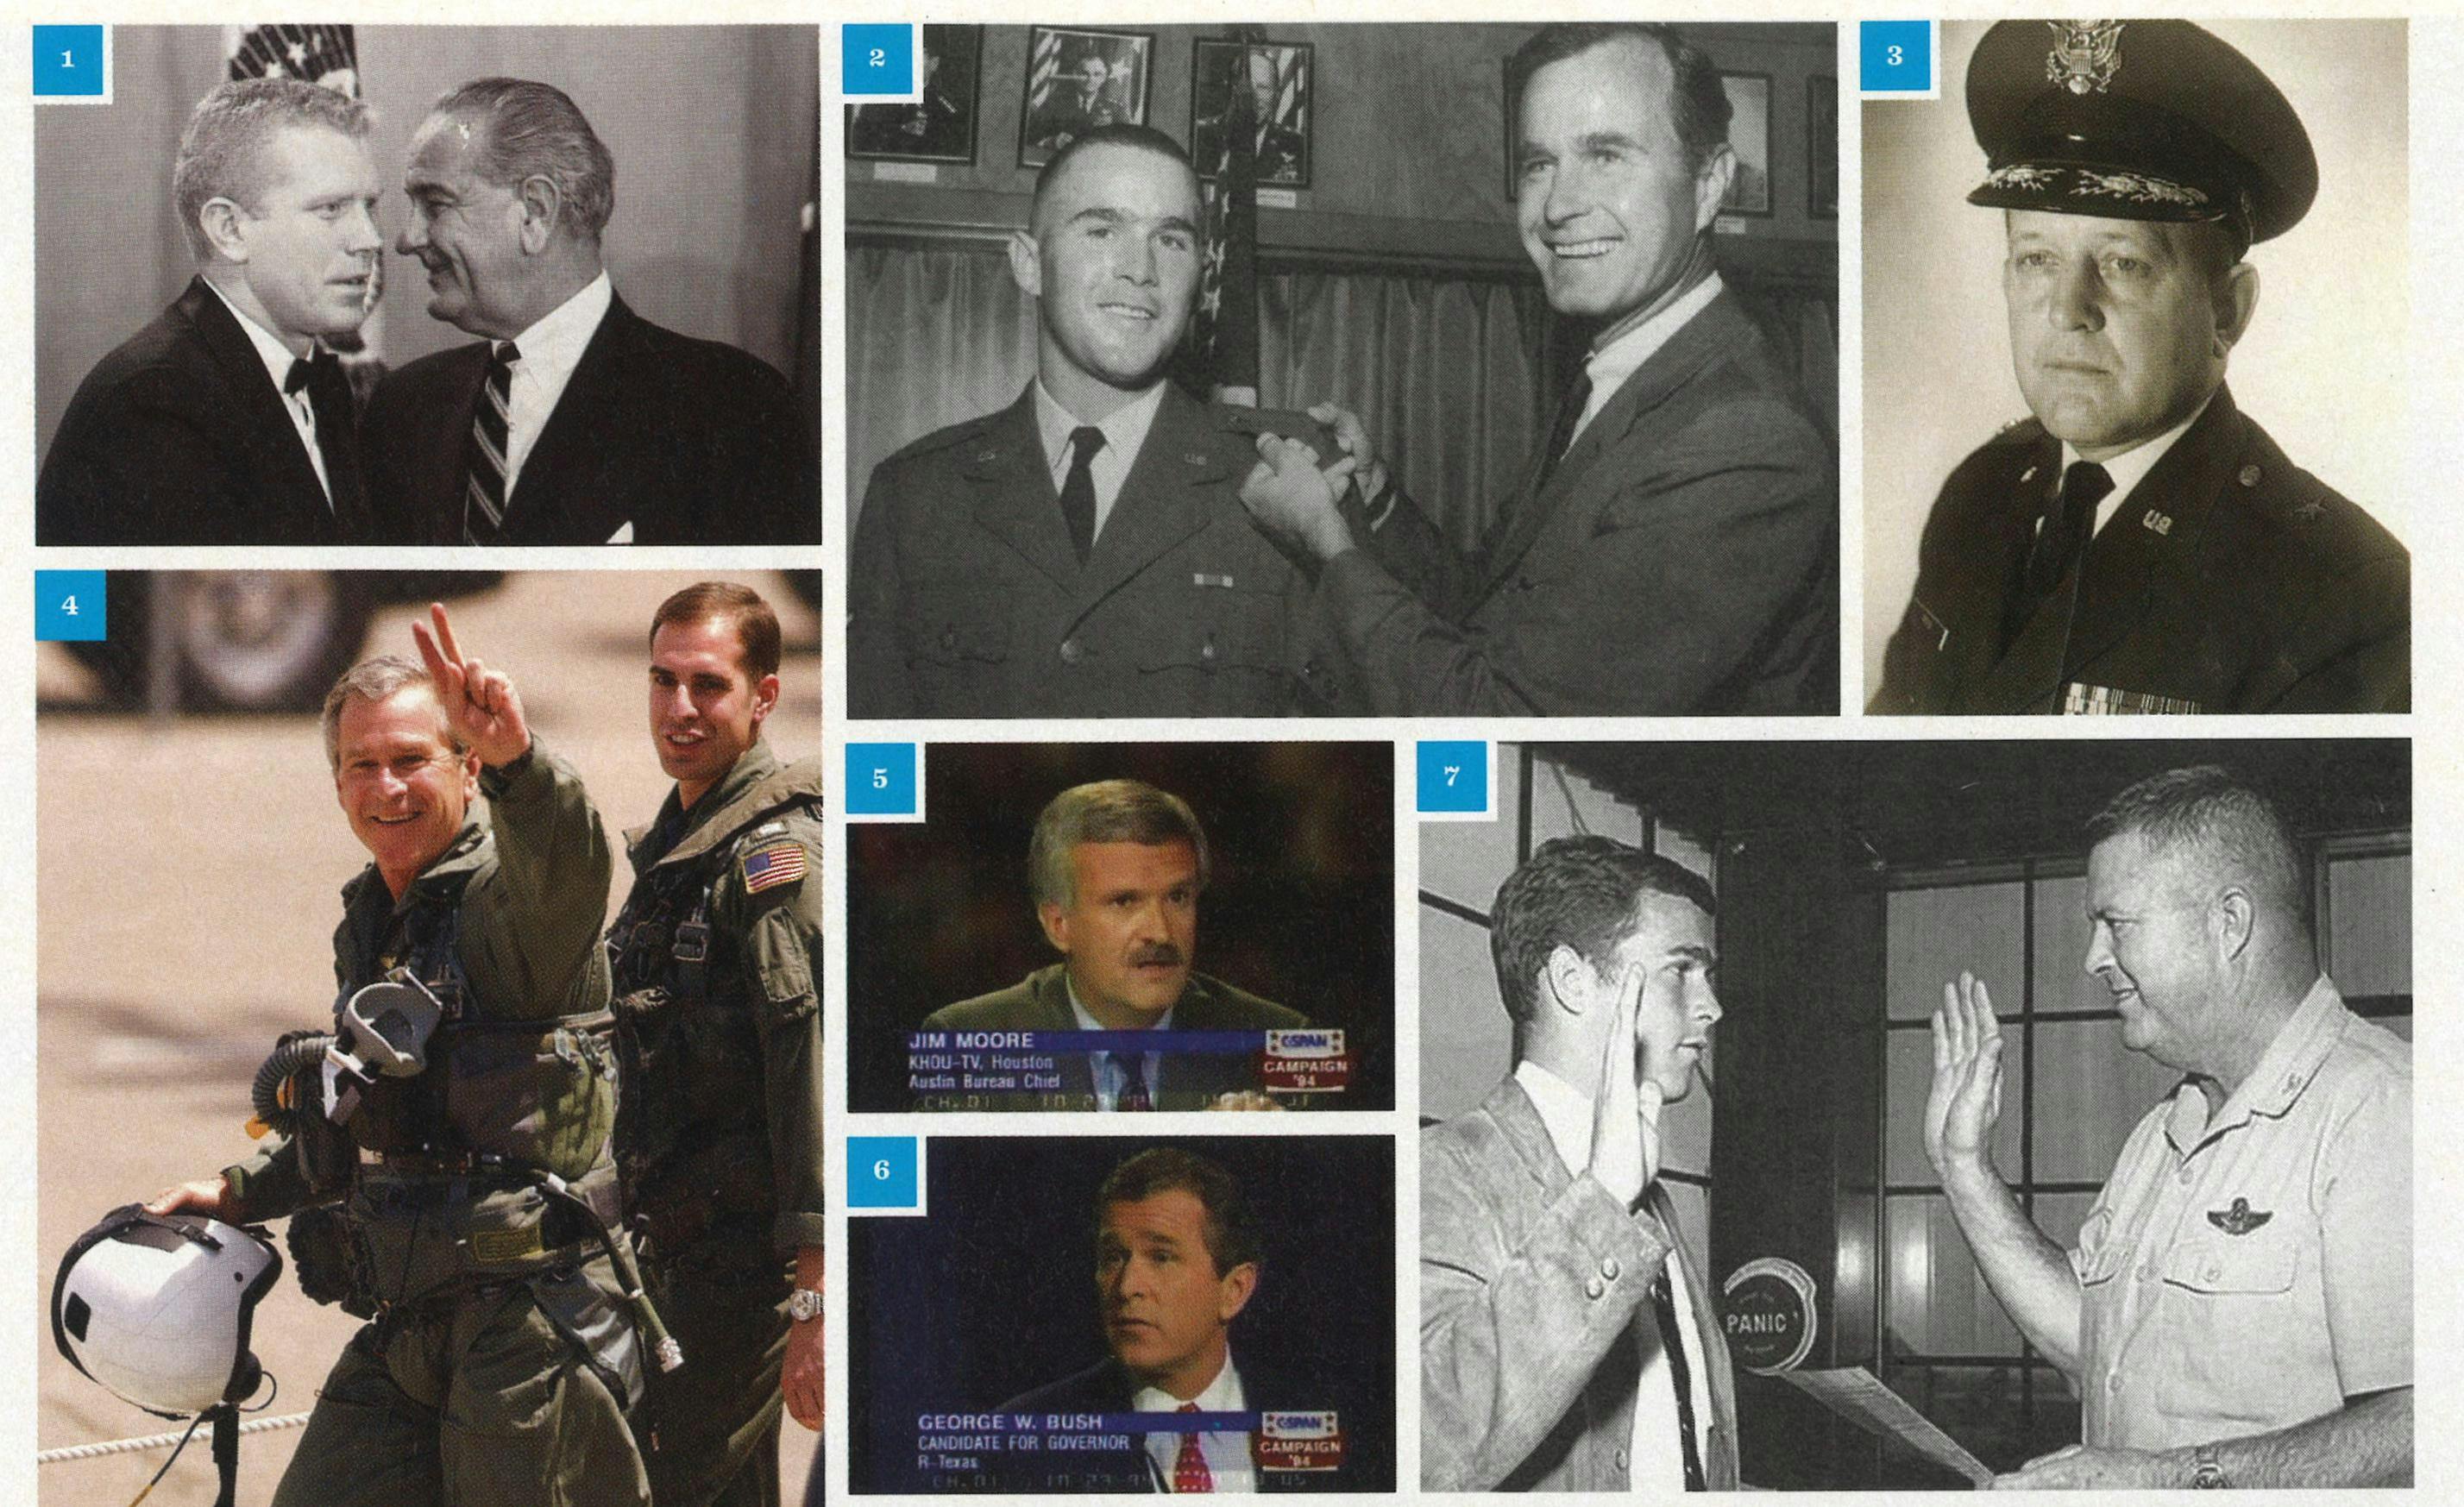 1. Speaker of the Texas House Ben Barnes and President Lyndon Johnson in 1967. 2. Bush and his father, shortly after he was made an officer in the Texas Air National Guard in 1968. 3. Brigadier General James Rose. 4. Bush in 2003 after his infamous speech on the deck of the USS Abraham Lincoln. 5. & 6. Jim Moore and Bush at the 1994 gubernatorial debate. 7. Bush with Colonel Walter "Buck” Staudt in 1968.